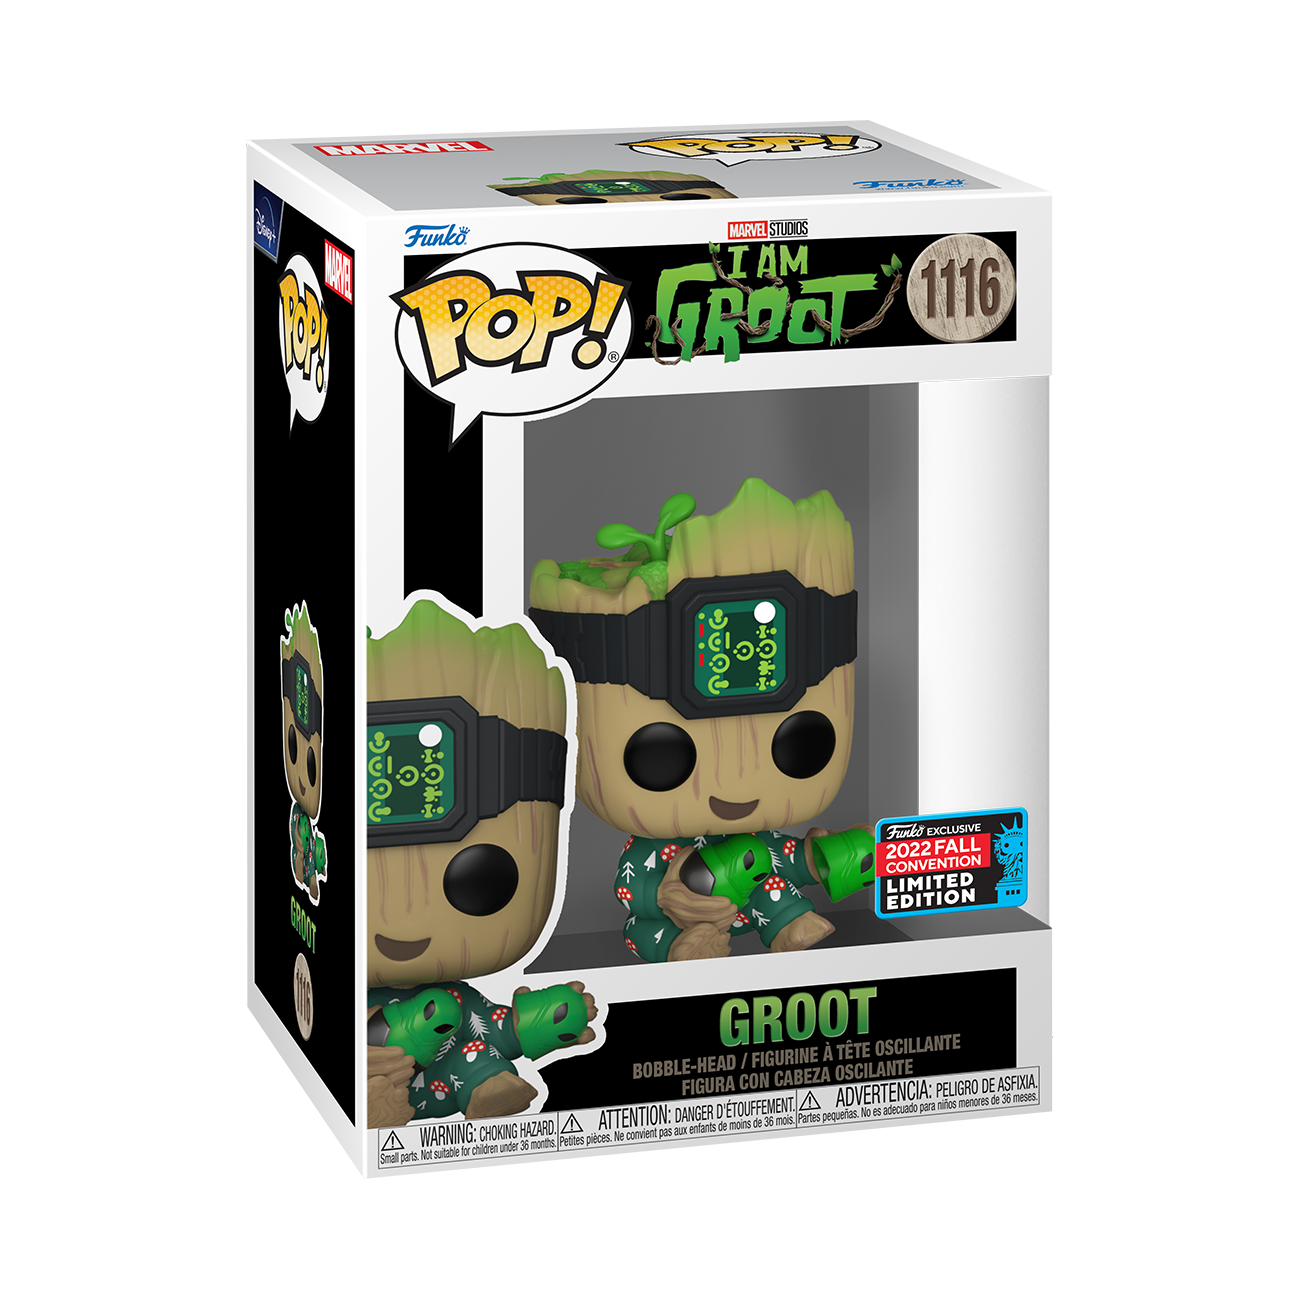 Marvel I Am Groot - Groot NYCC 2022 Fall Convention Exclusive Pop! Vinyl